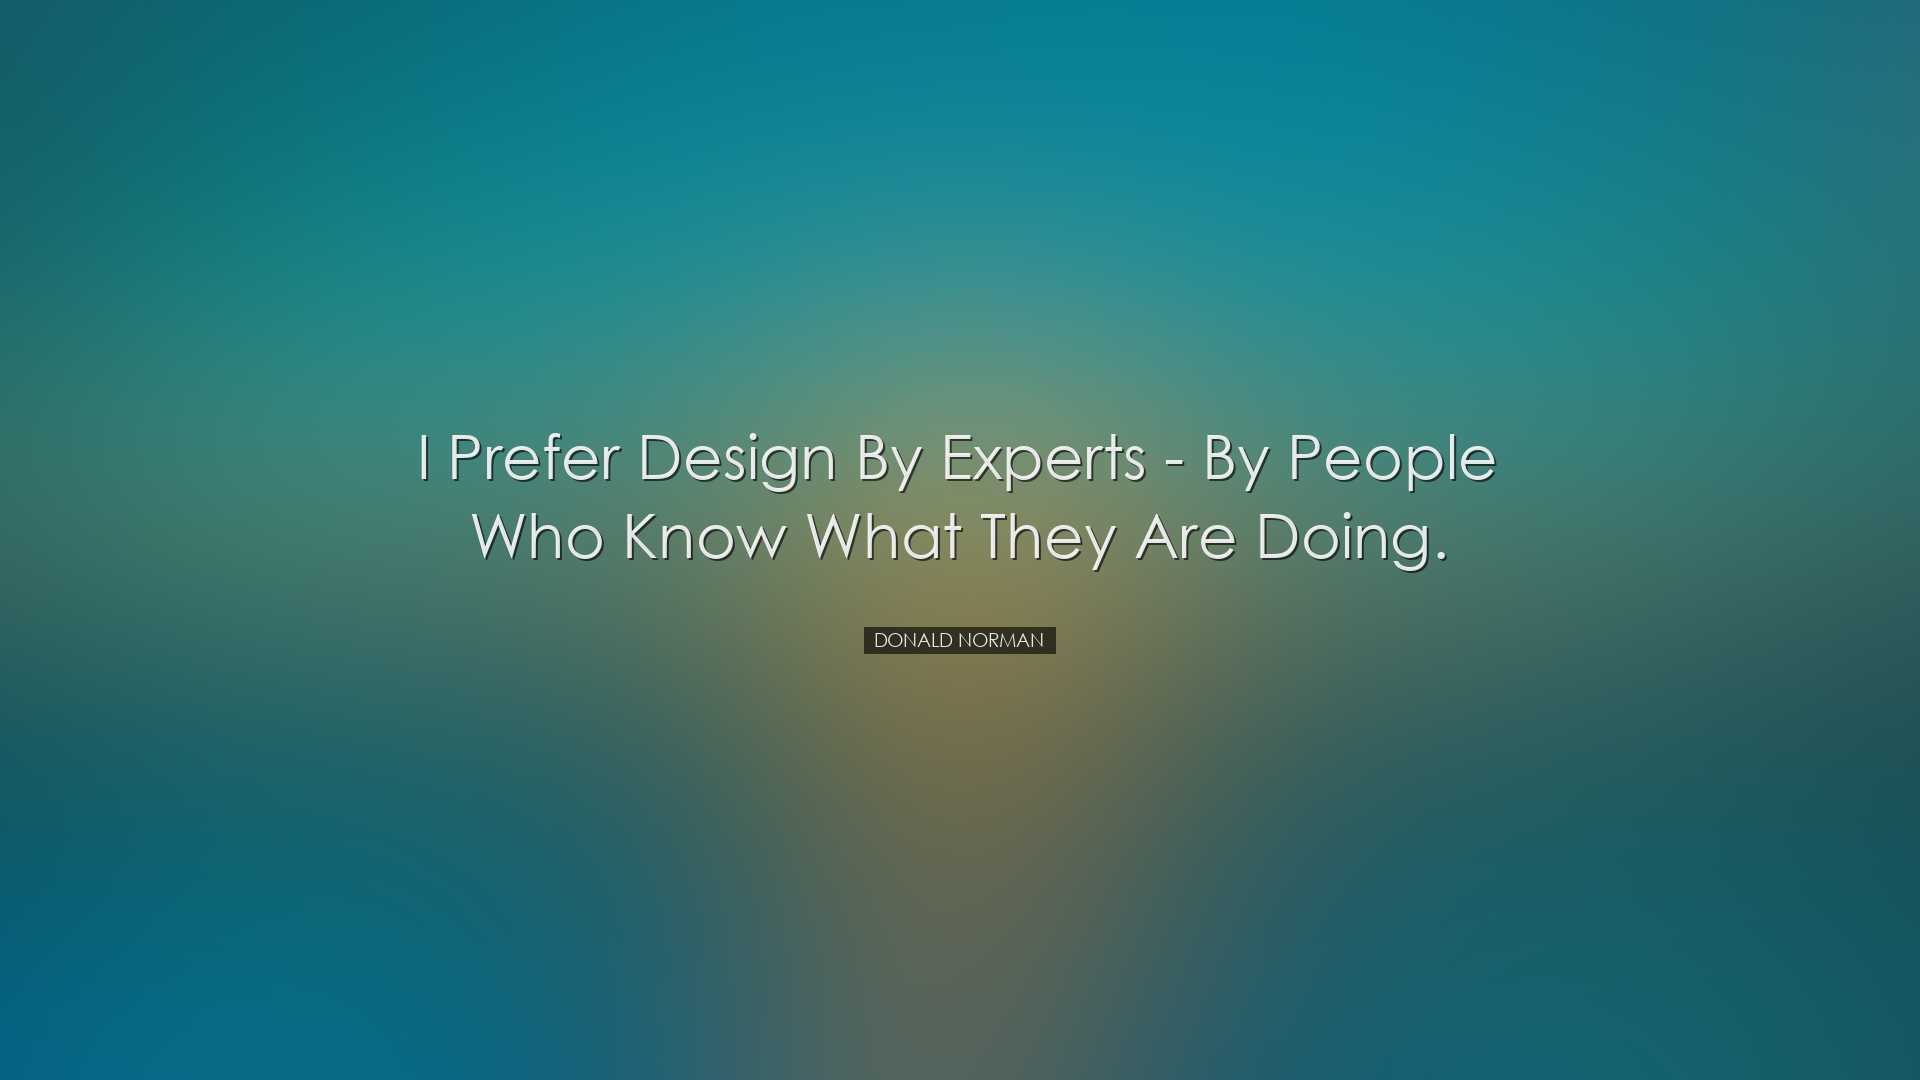 I prefer design by experts - by people who know what they are doin